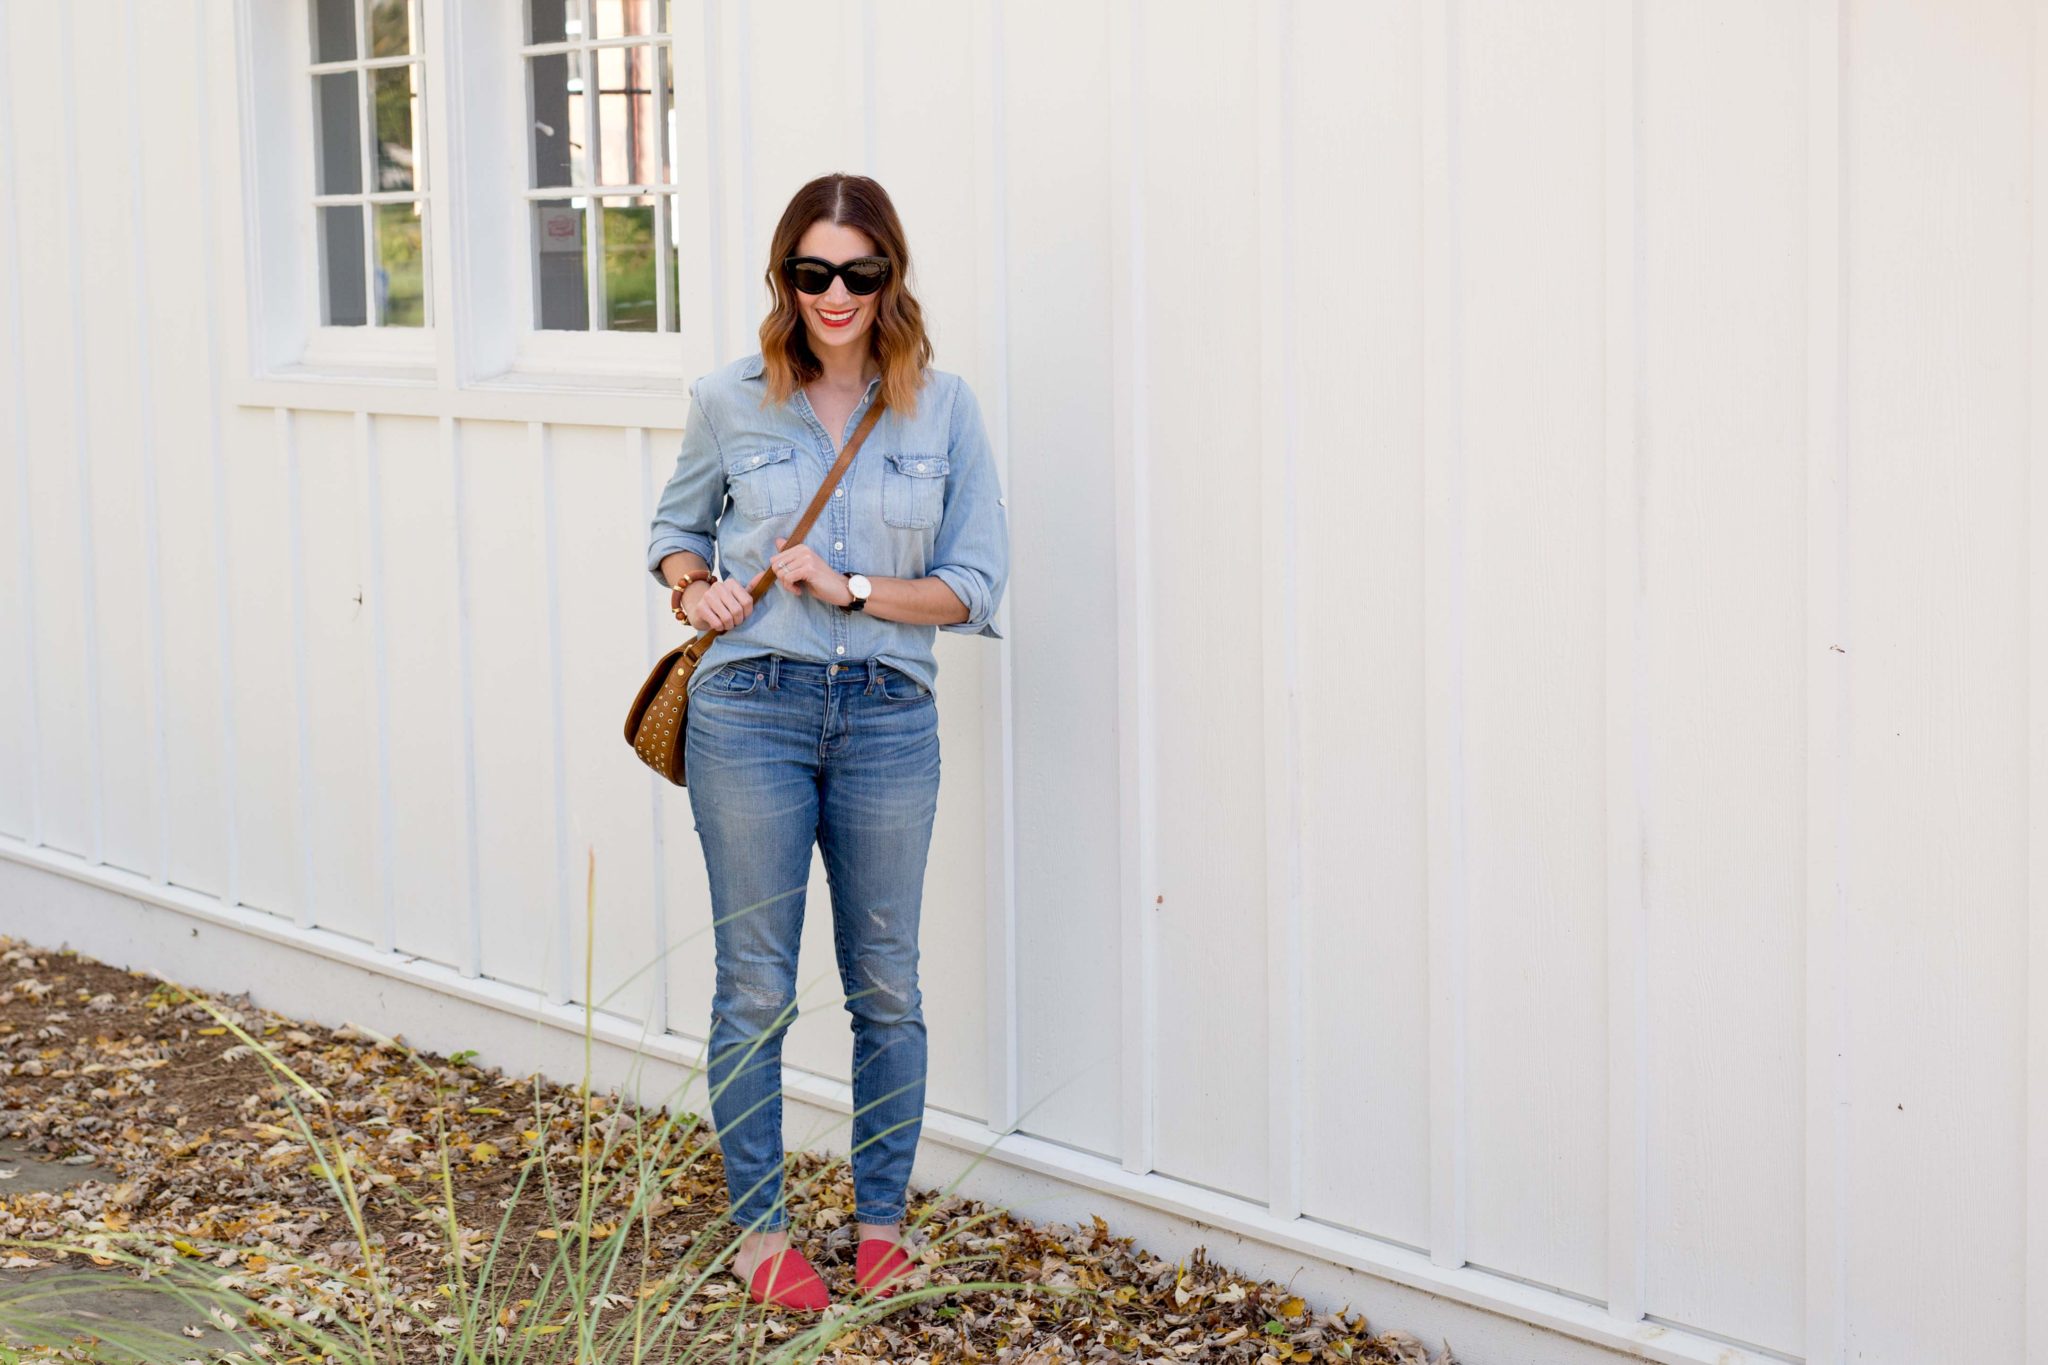 fall outfit inspiration | starch slide shoes | canadian tuxedo | denim on denim looks | chambray shirt | jcrew | madewell | fall mom style | fall toddler style | mom and mini style | fall style on allweareblog.com